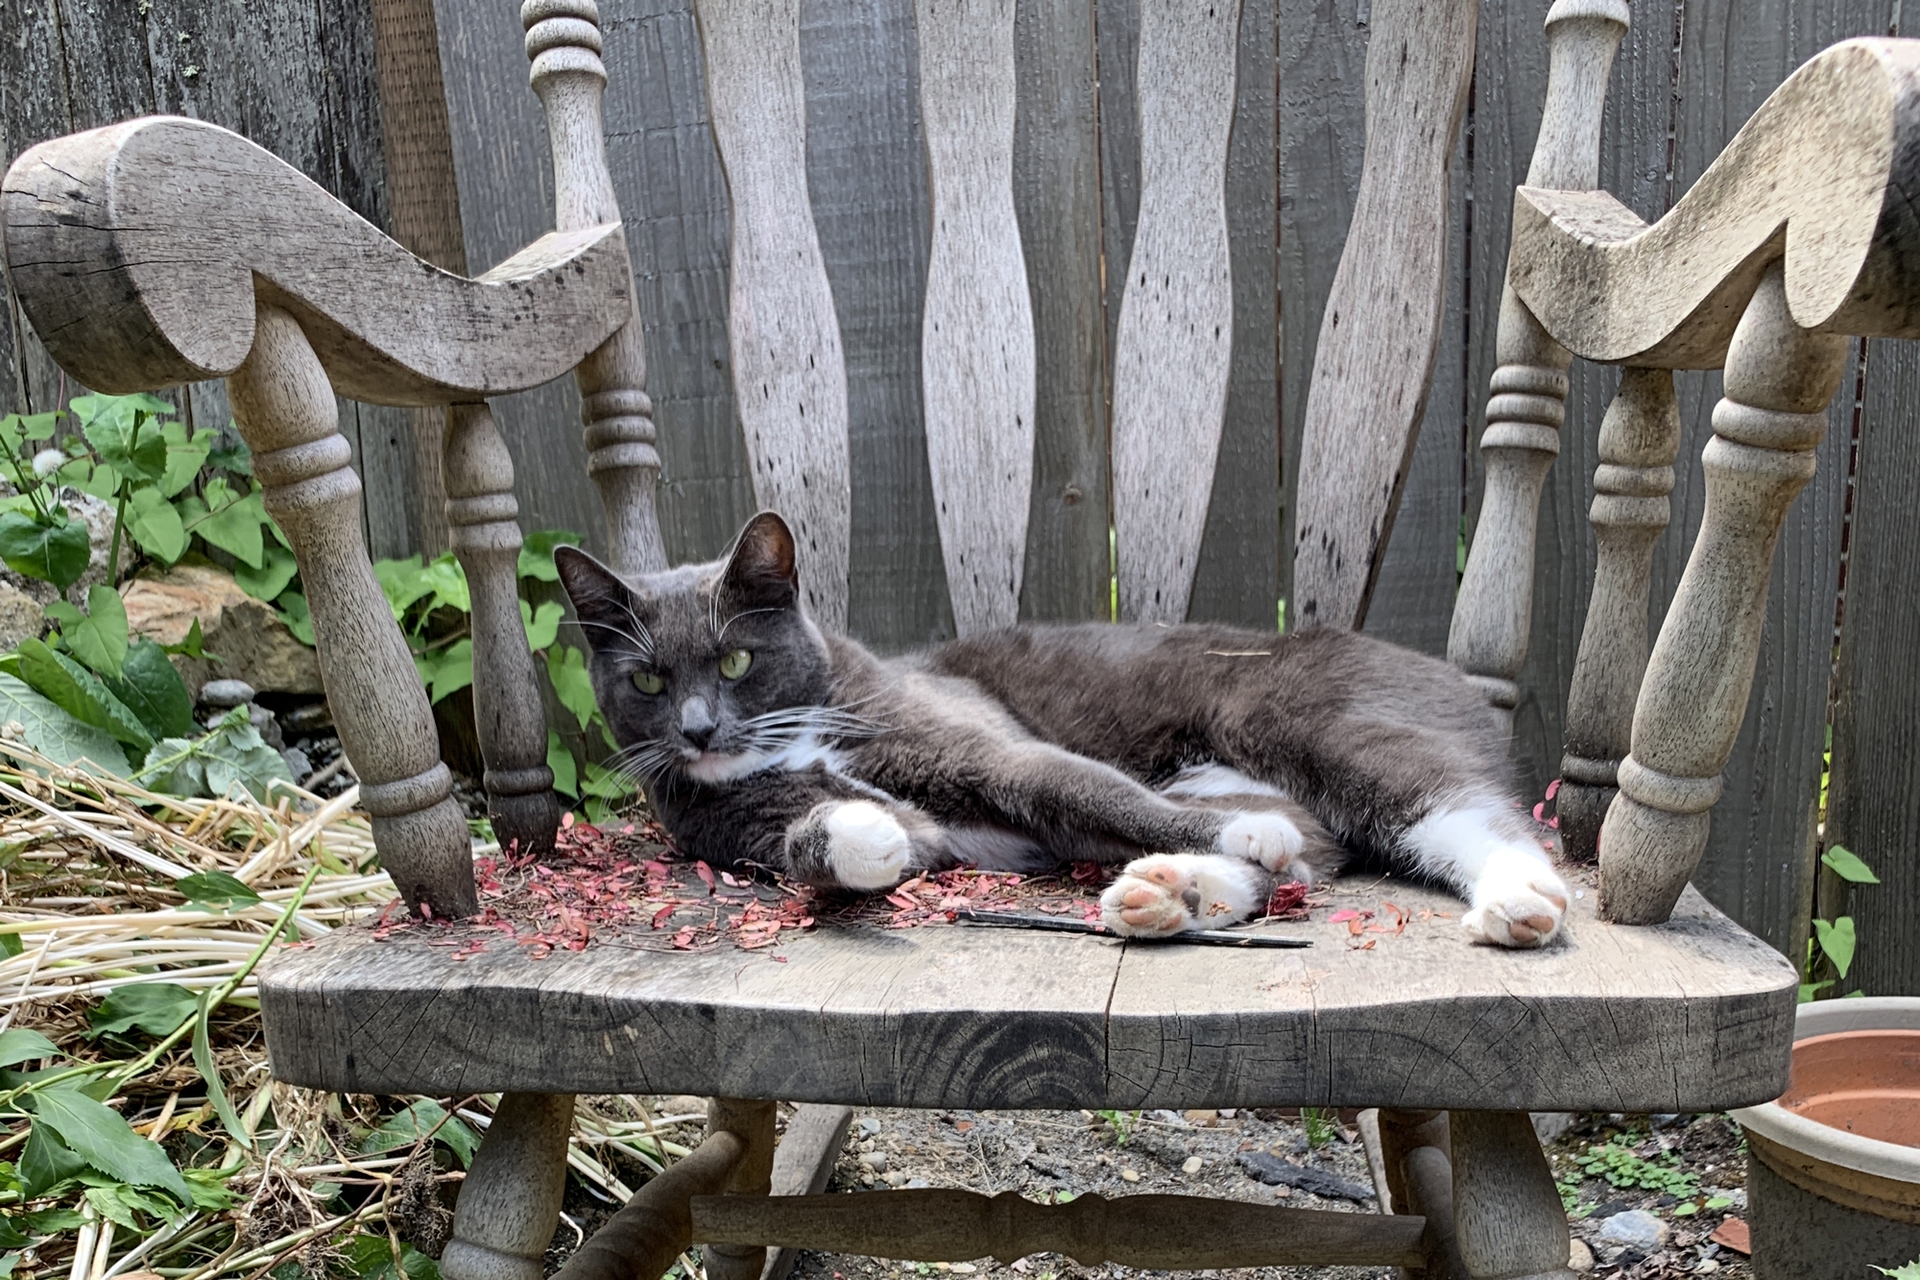 A cat lies on a weathered wooden rocking chair.